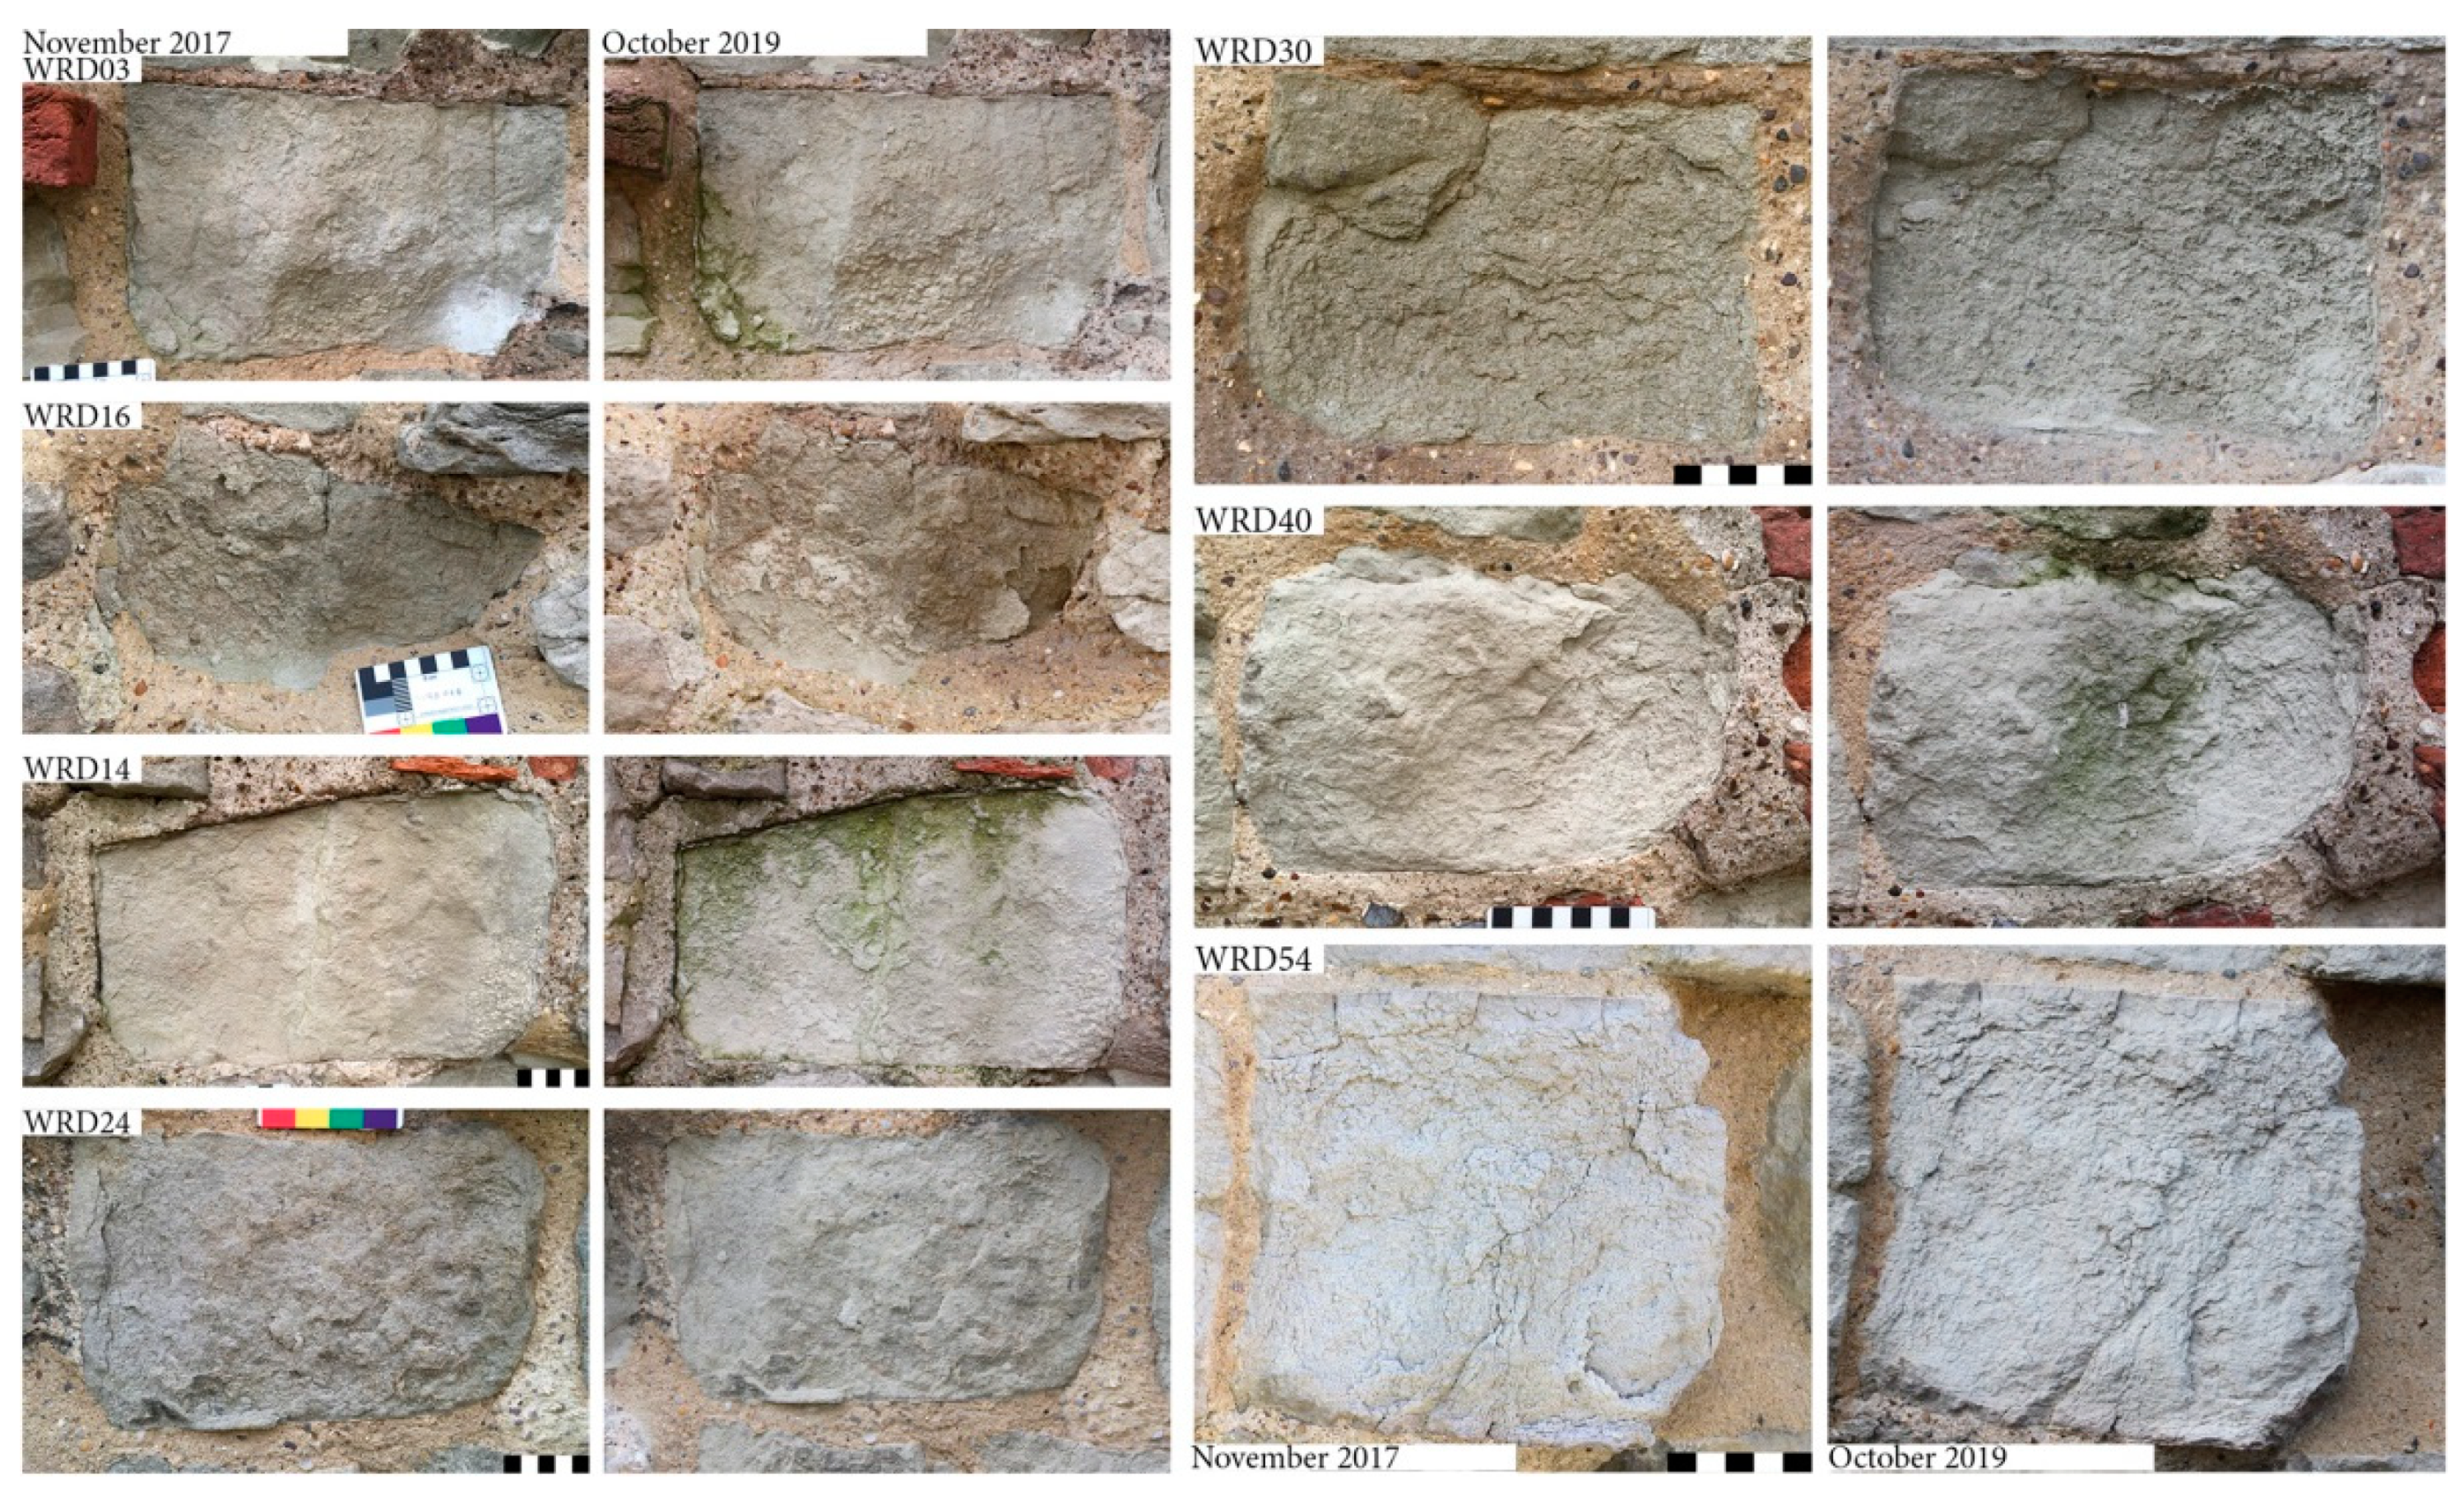 Minerals Free Full Text In Situ Non Destructive Testing For Evaluating The Role Of Pointing Mortar In Preventive Conservation Strategies A Case Study On Reigate Stone At The Wardrobe Tower Tower Of London